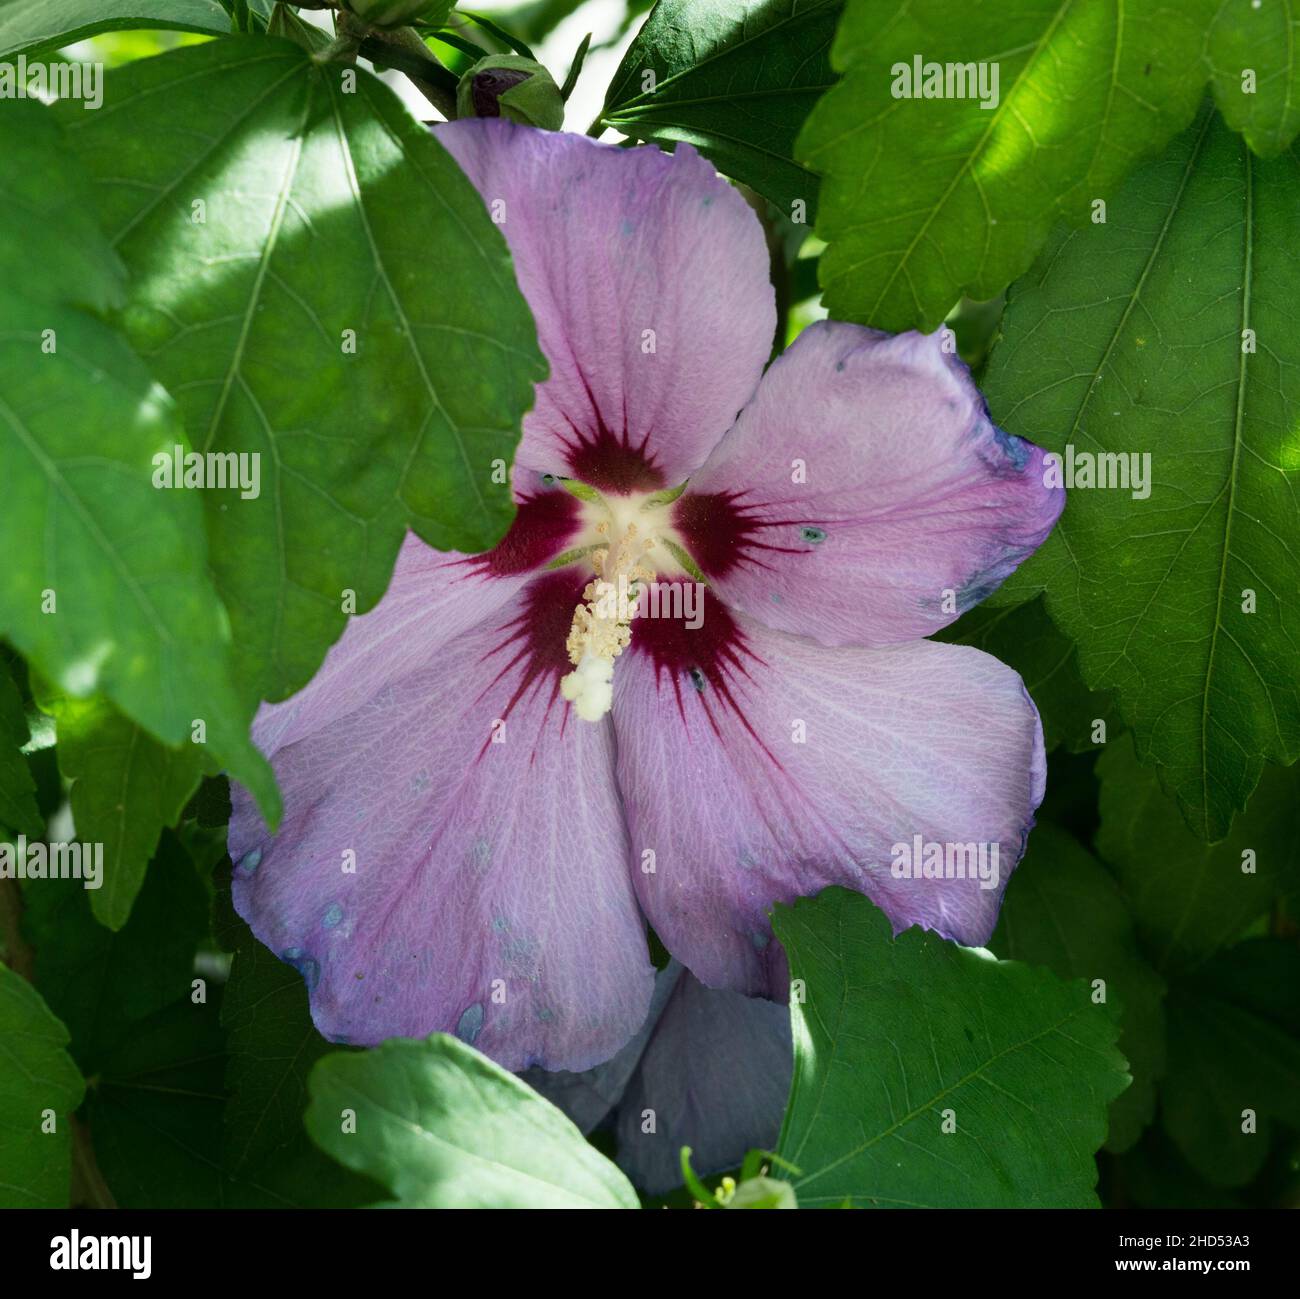 purple hibiscus flower head with green leaves blooming in summer background Stock Photo